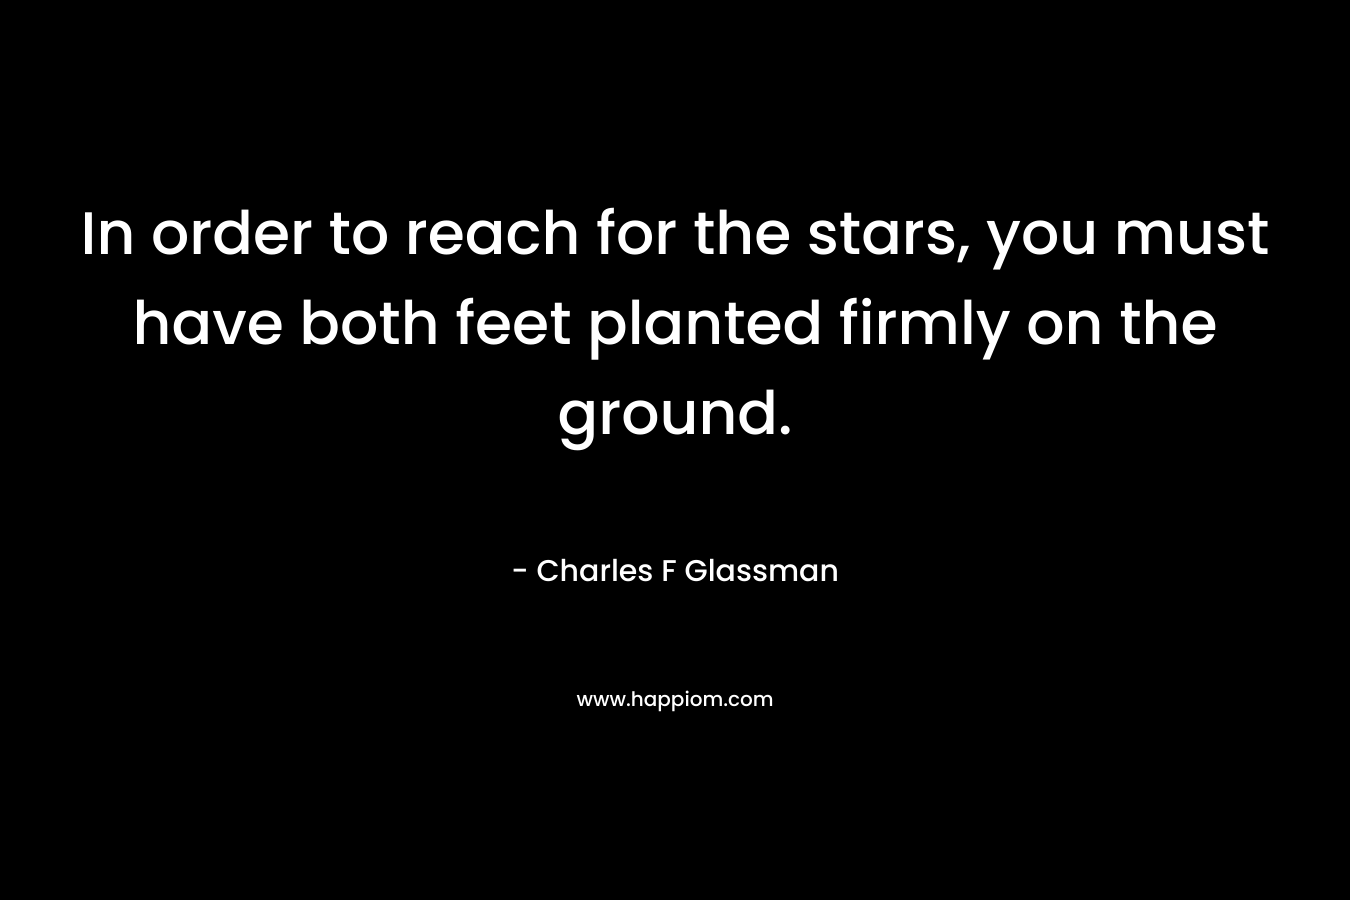 In order to reach for the stars, you must have both feet planted firmly on the ground.